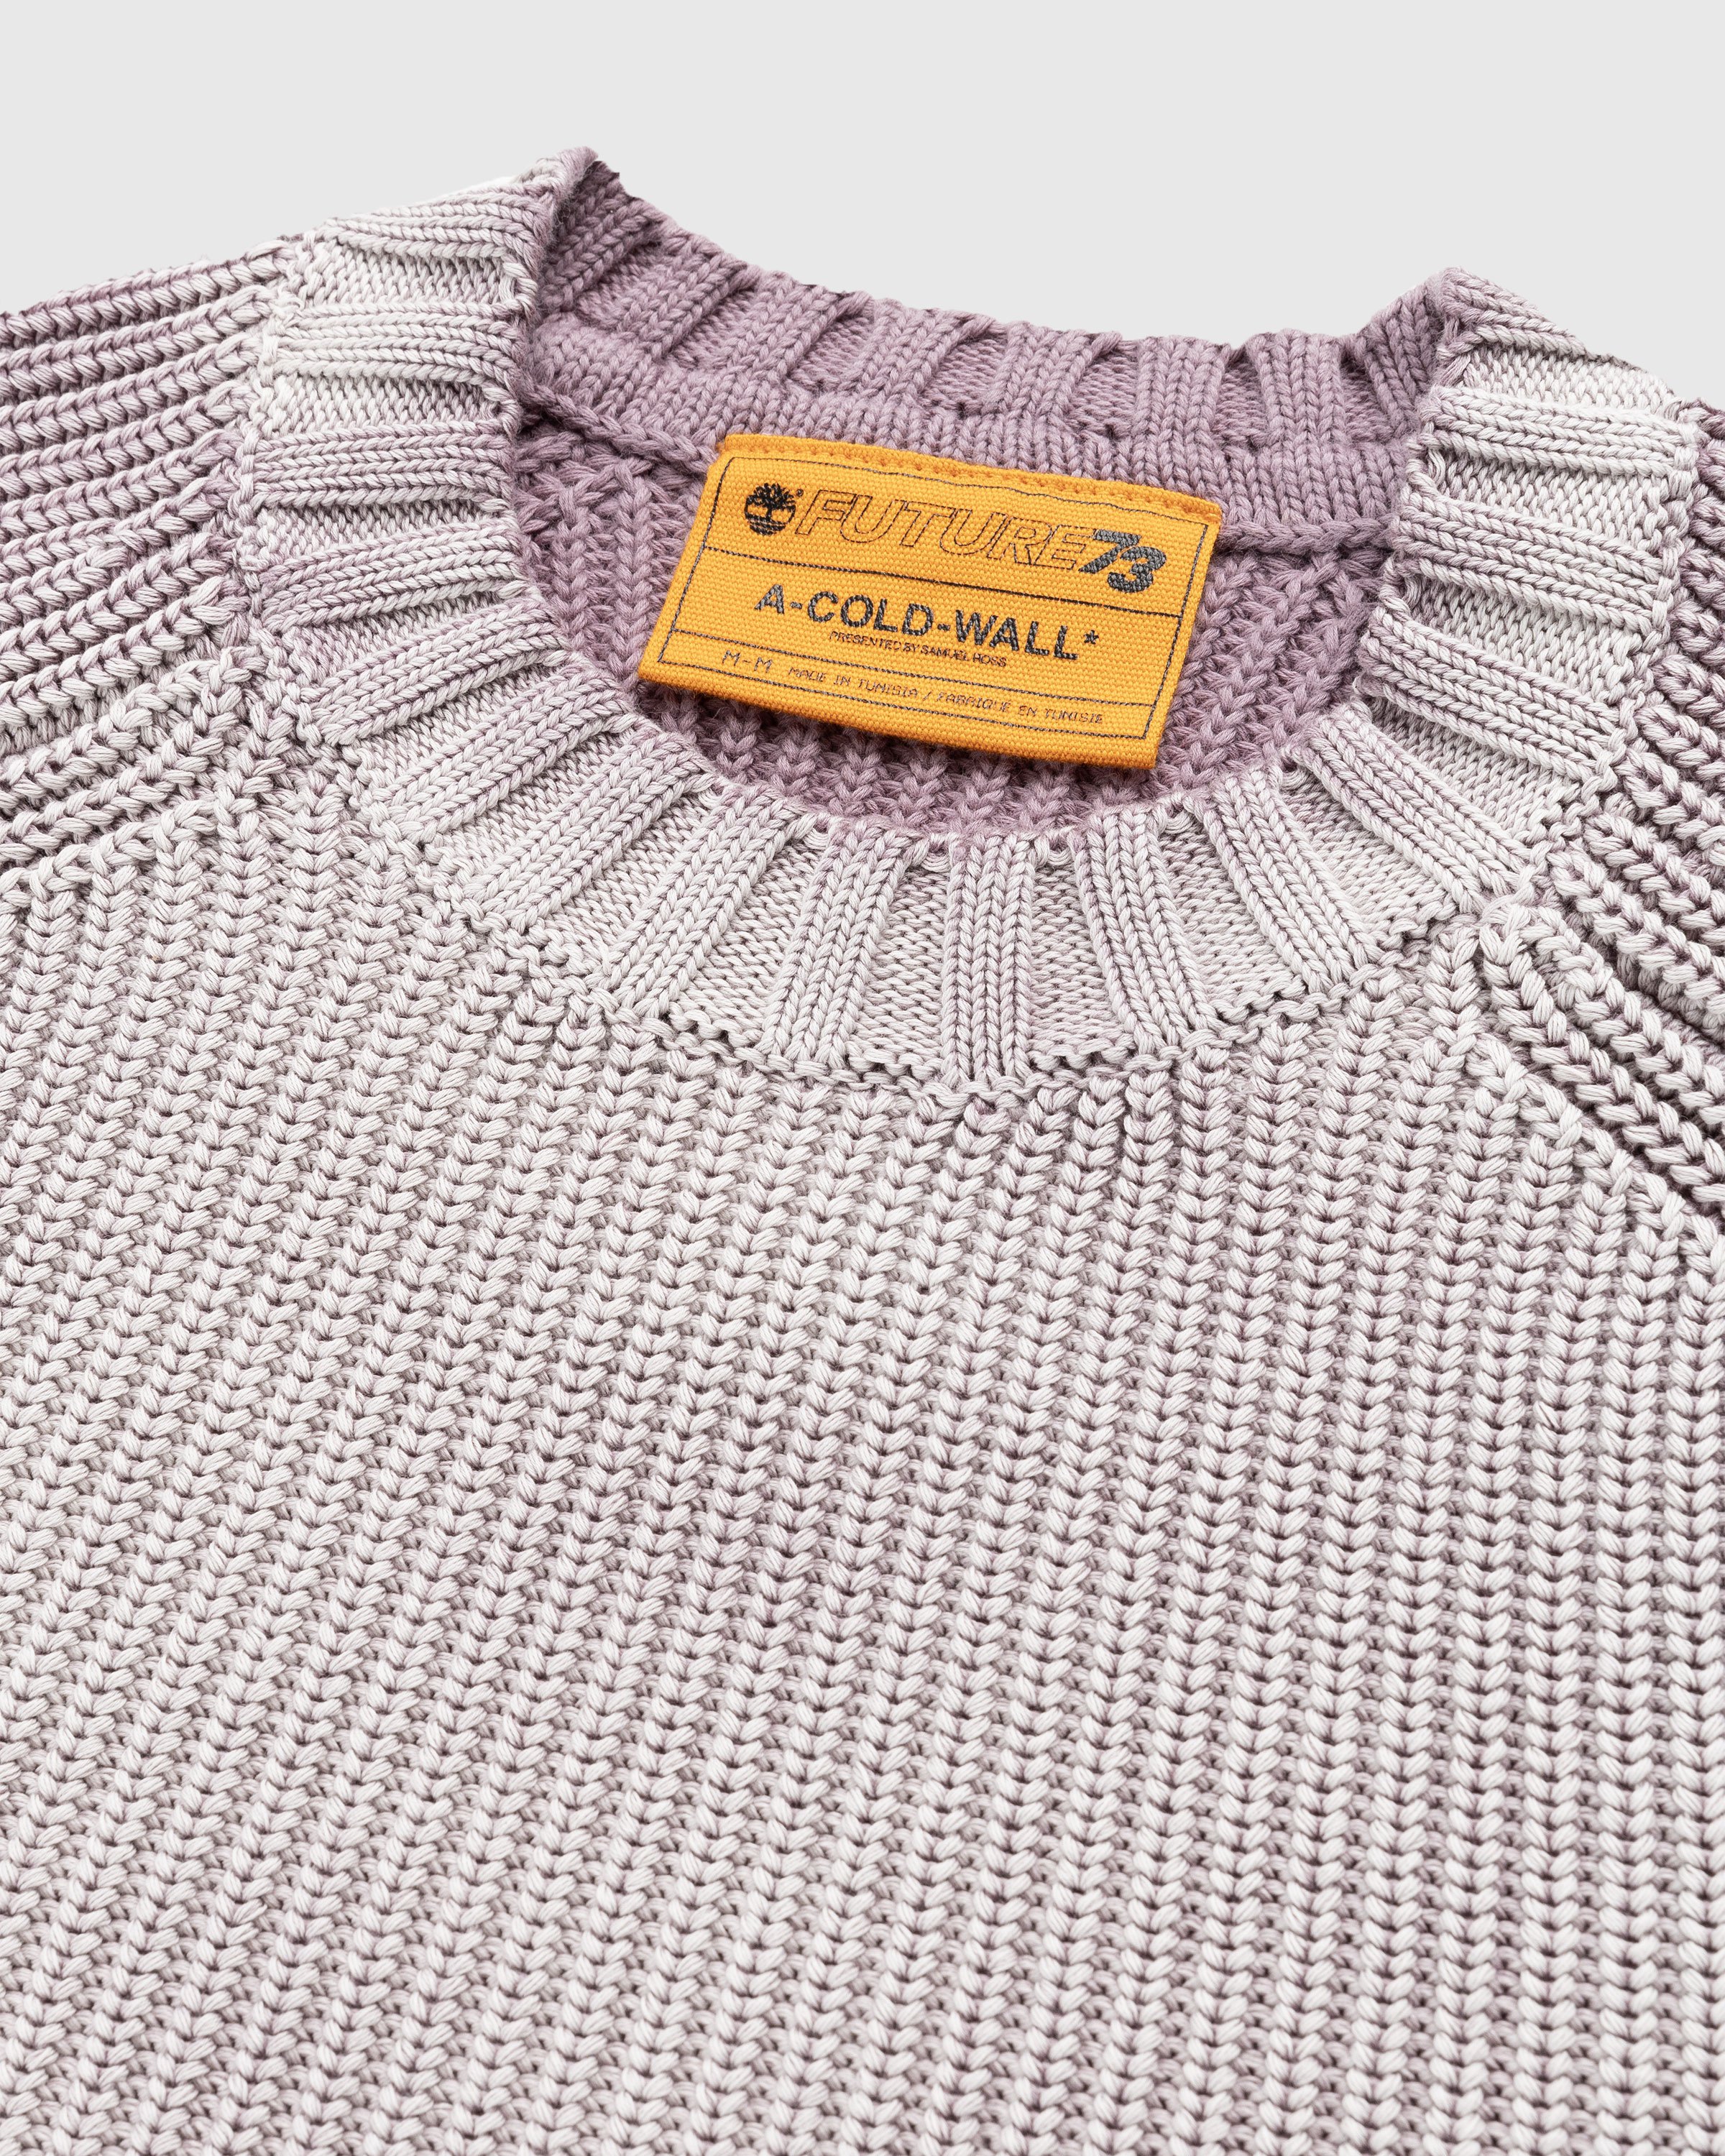 A-Cold-Wall* x Timberland - Fisherman Knit Moonscape - Clothing - Purple - Image 3